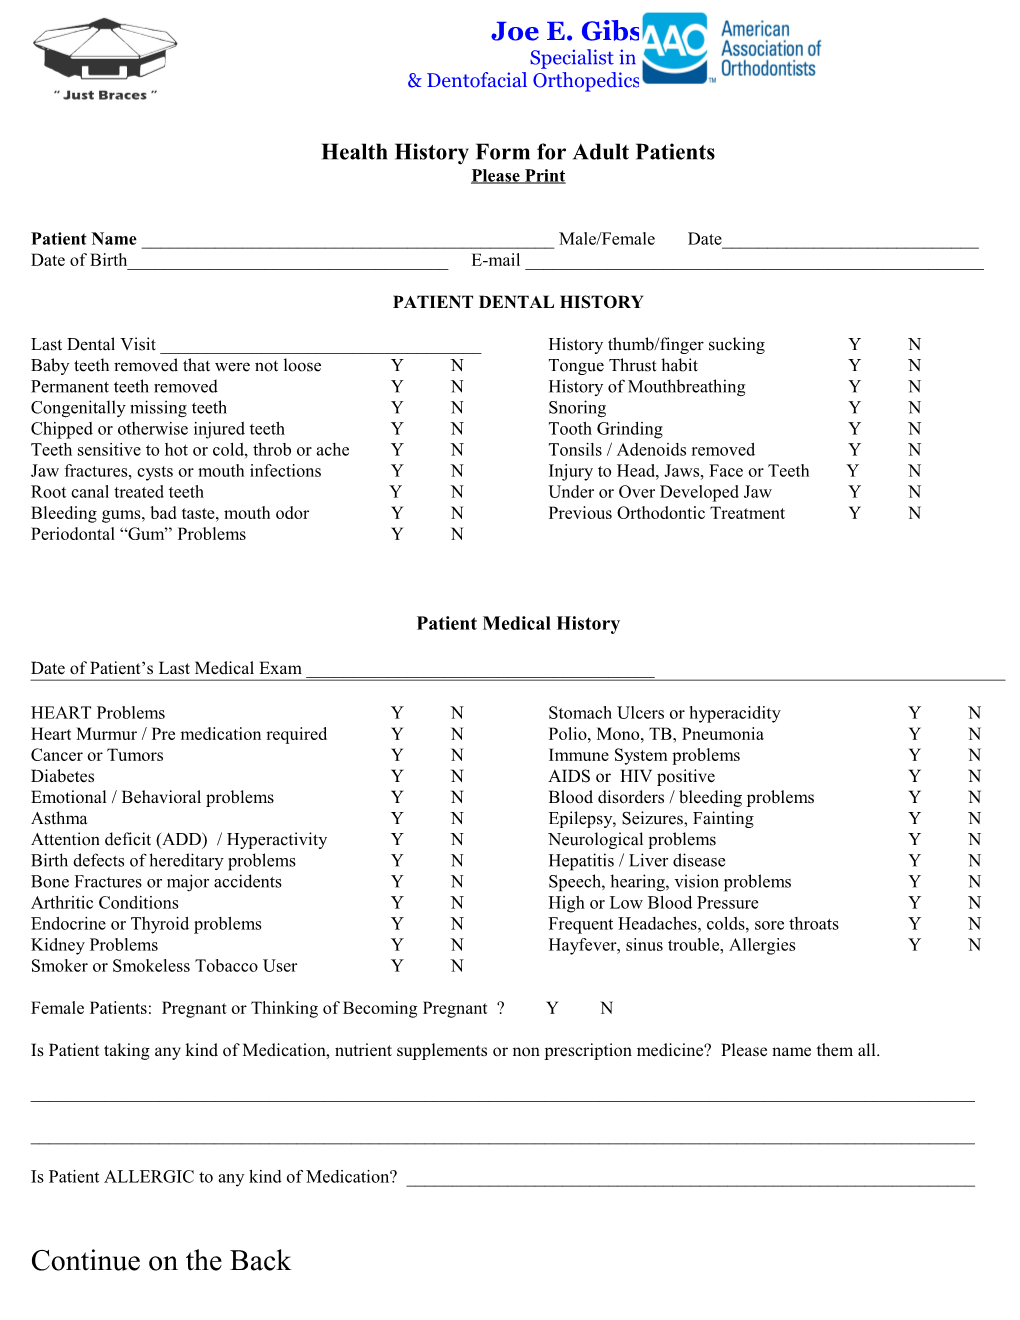 Health History Form for Adult Patients